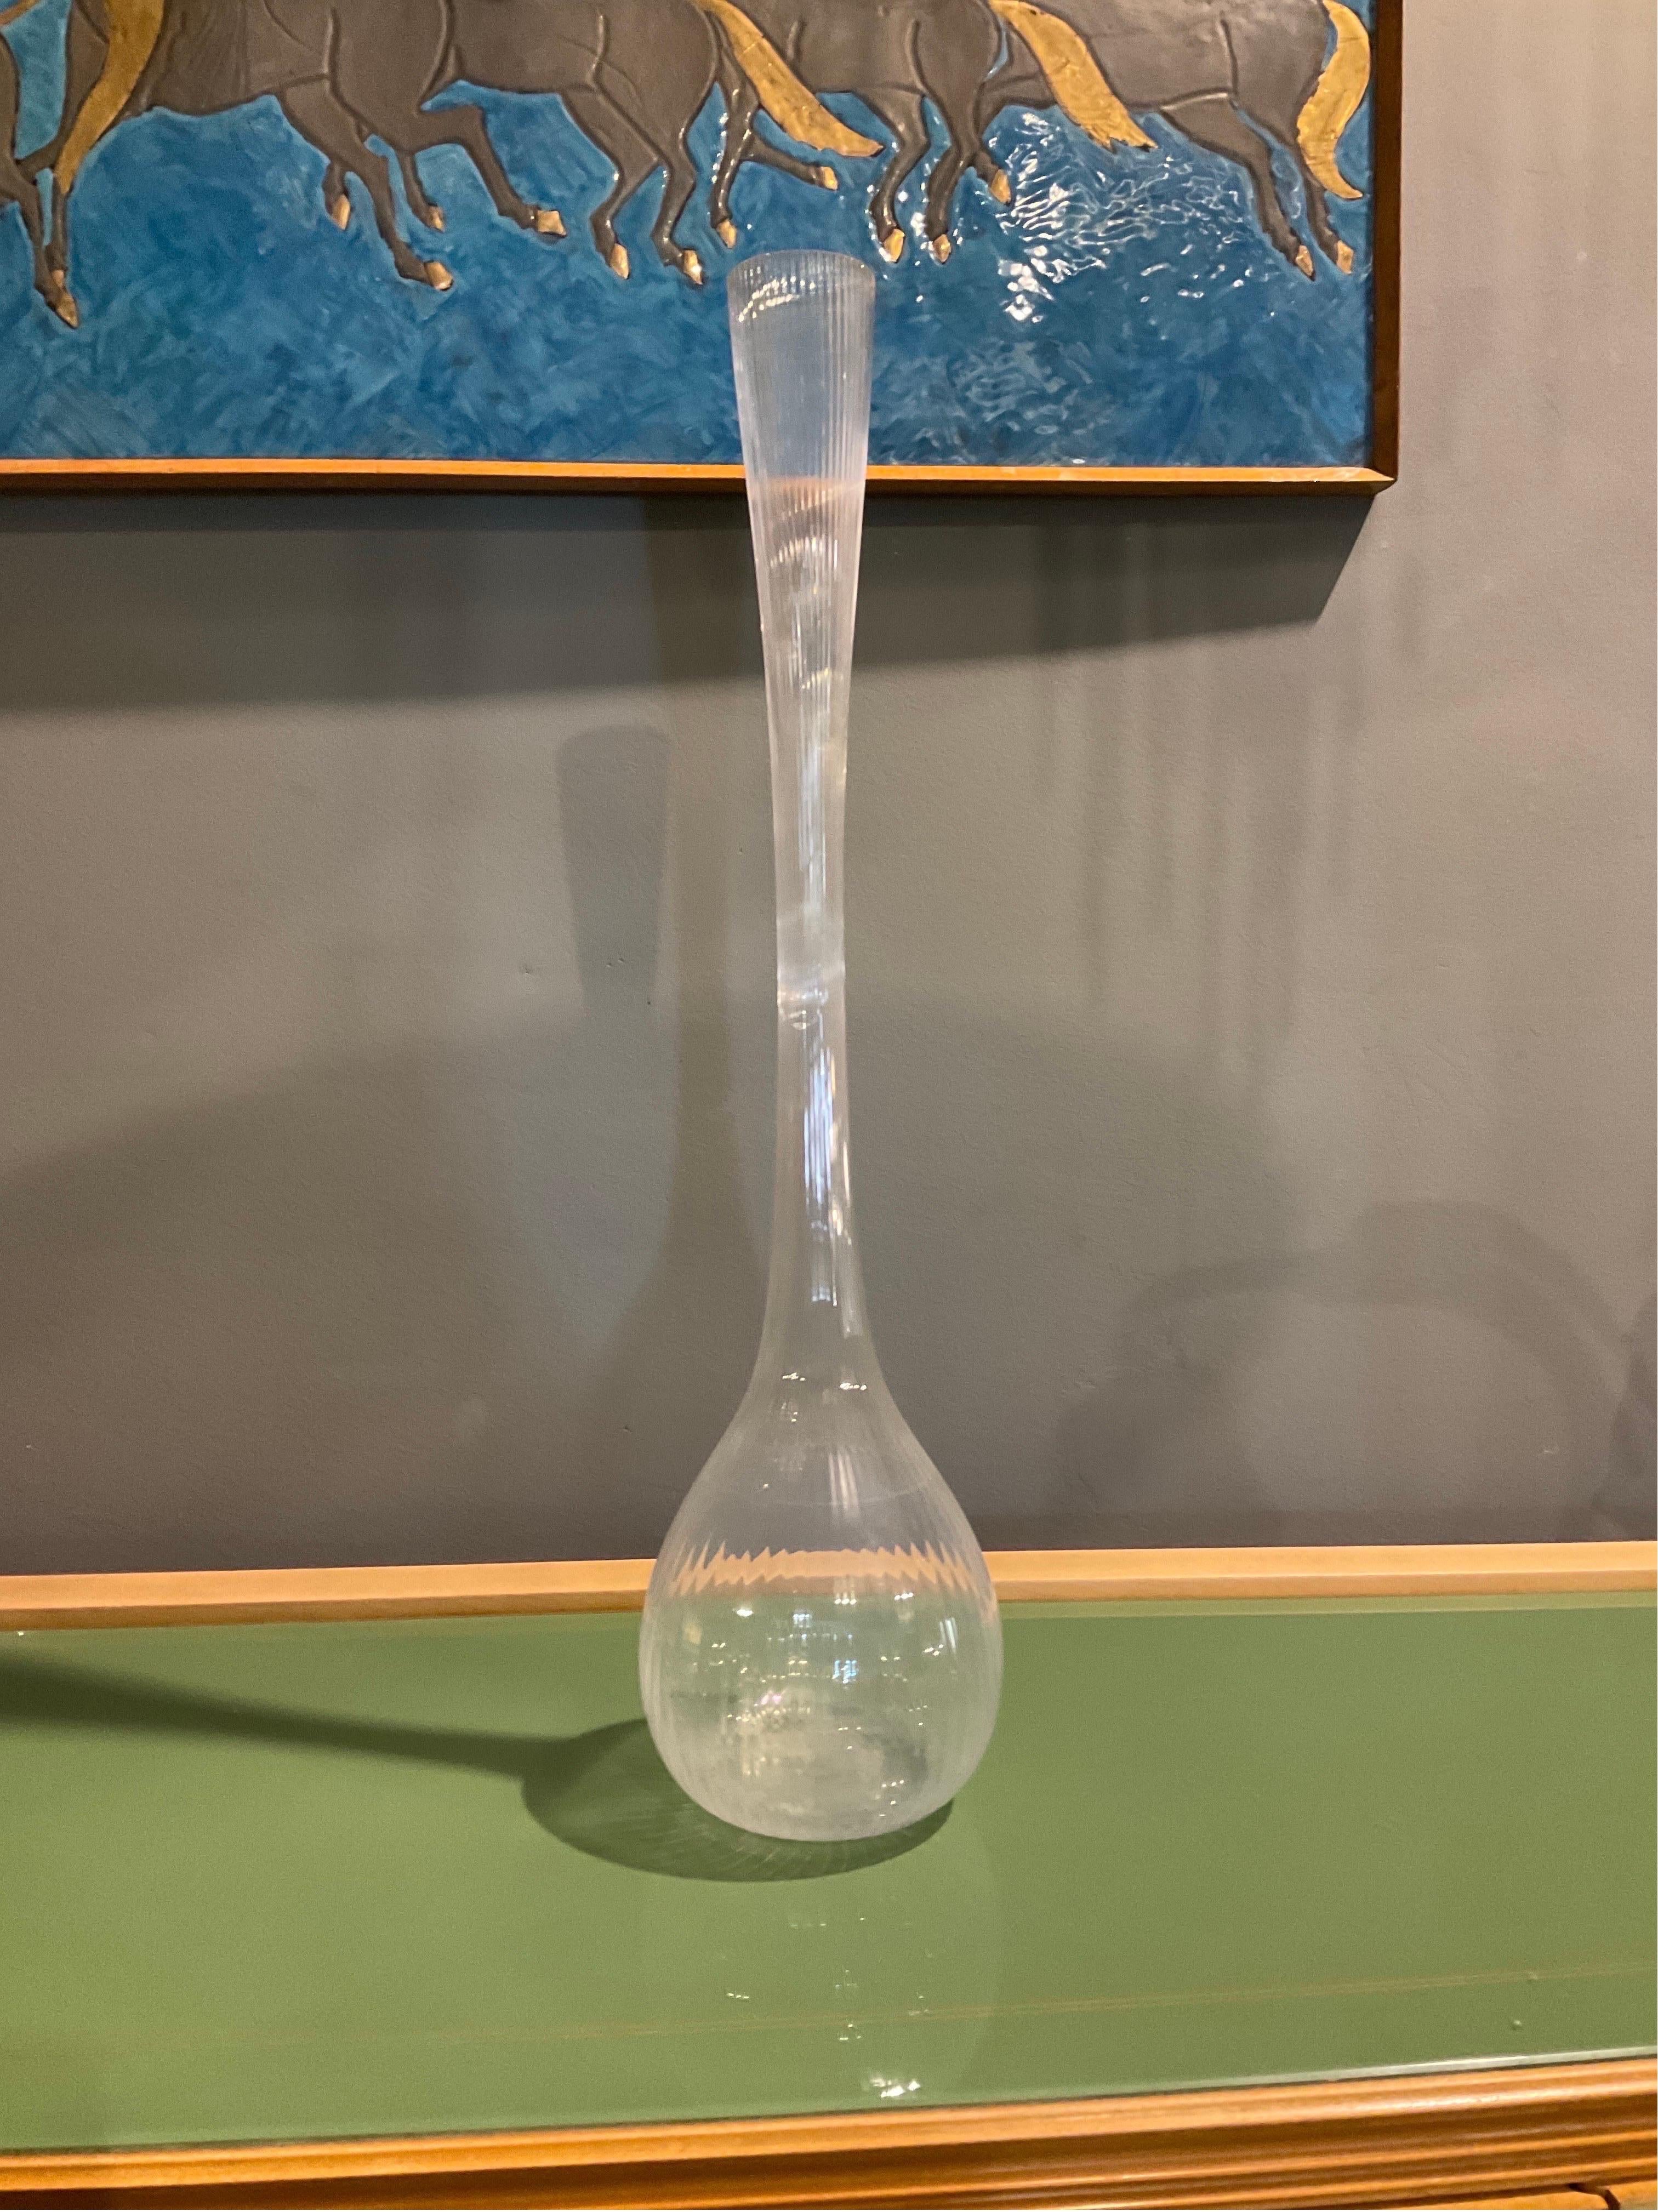 This elegant glass vase was crafted by the renowned French manufacturer Daum in the 1970s. Its sinuous, slender form is a perfect example of the style, and the clear glass accentuates its graceful curves. The vase's simple yet striking design makes